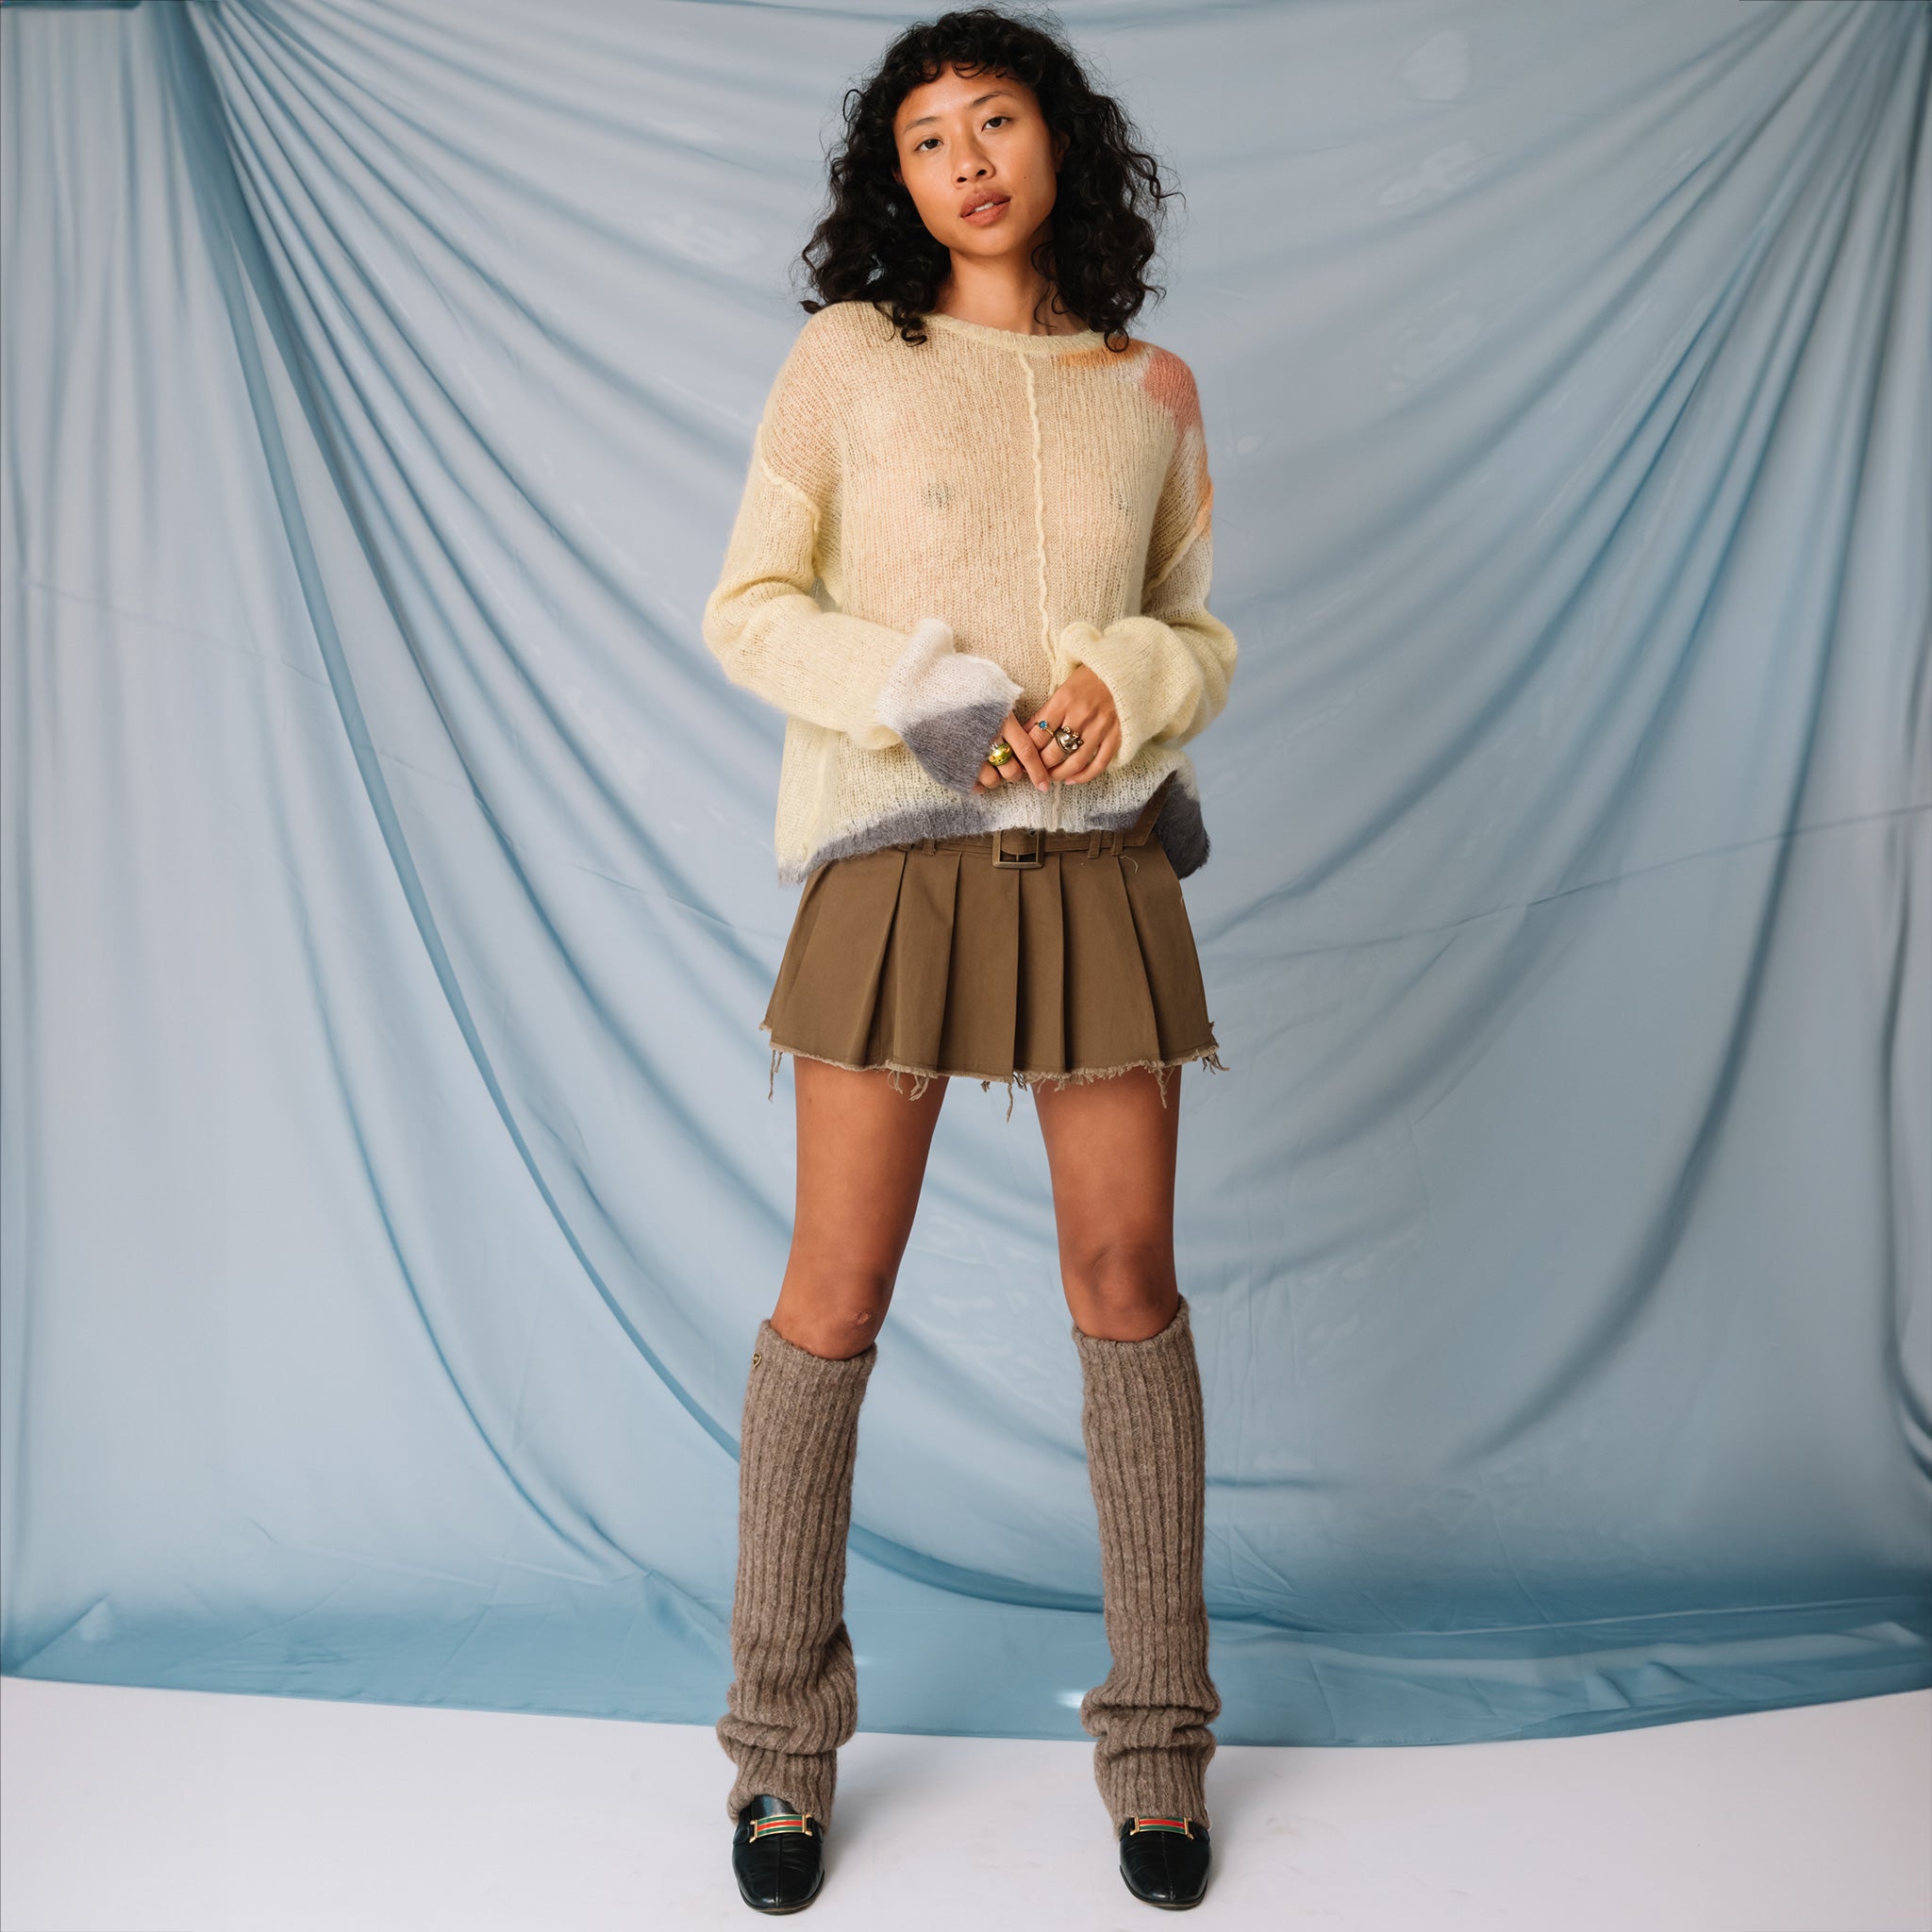 A model wears the pale yellow Composition sweater by Eckhaus Latta paired with a pleated mini skirt, leg warmers and black loafers, full outfit view.